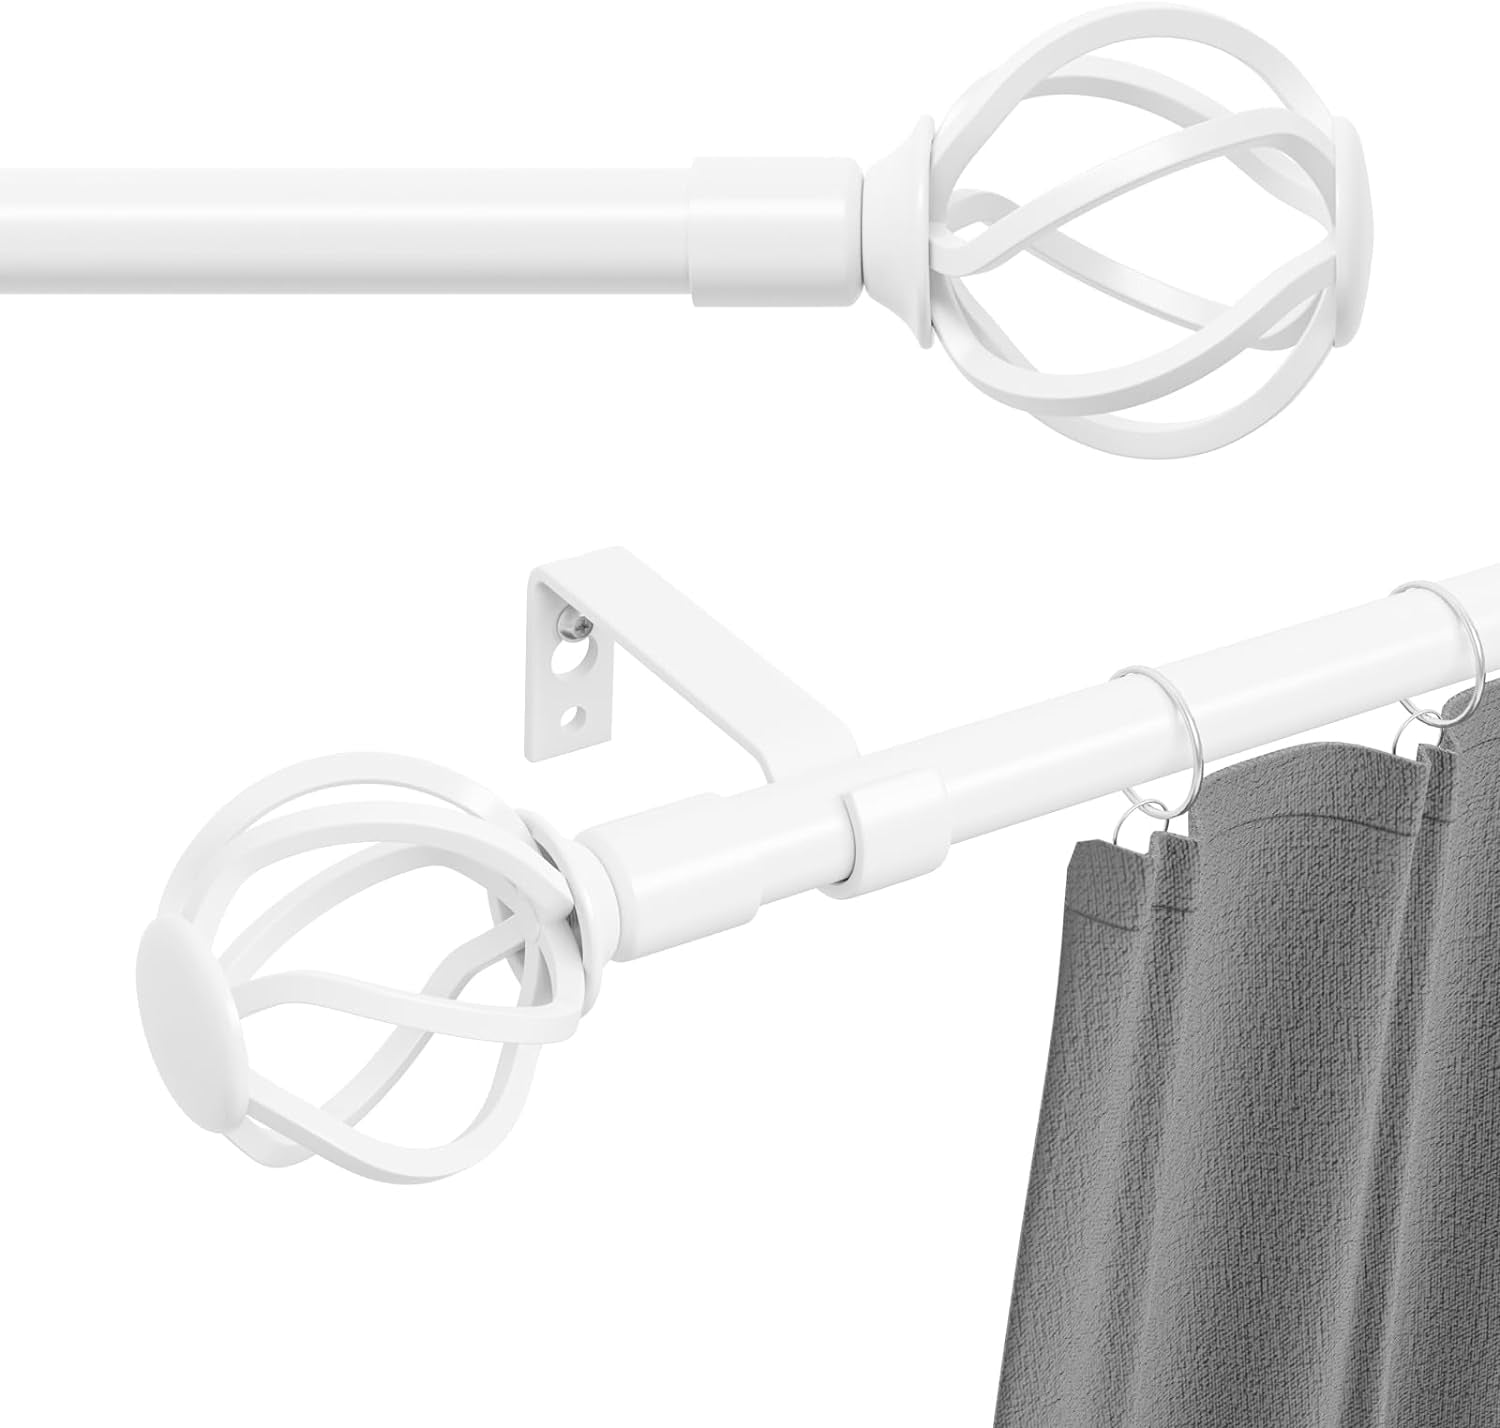 Curtain Rods for Windows 66 to 120 Inch, Heavy Duty Curtain Rod with Cage Finials, Adjustable Decorative Curtain Rods for Outdoor Patio, Sliding Glass Door, 5/8" Diameter - Black  GSBLUNIE White 66-120 Inch 